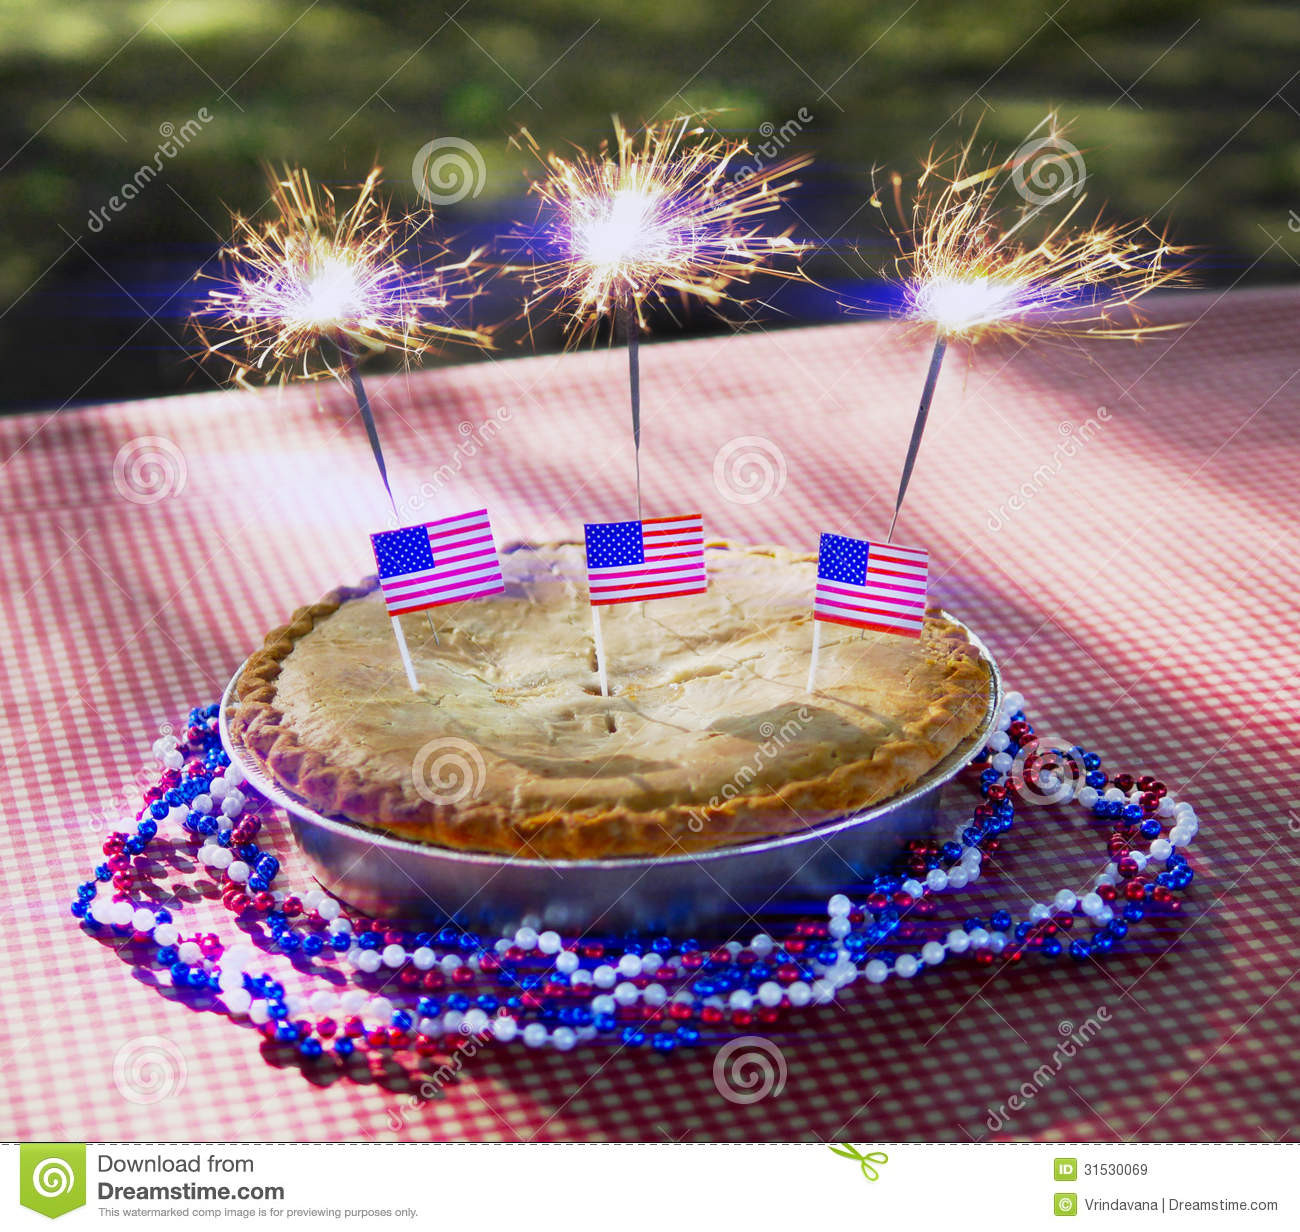 Apple Pie Fourth Of July
 4th July Apple Pie With Sparklers A Table Stock